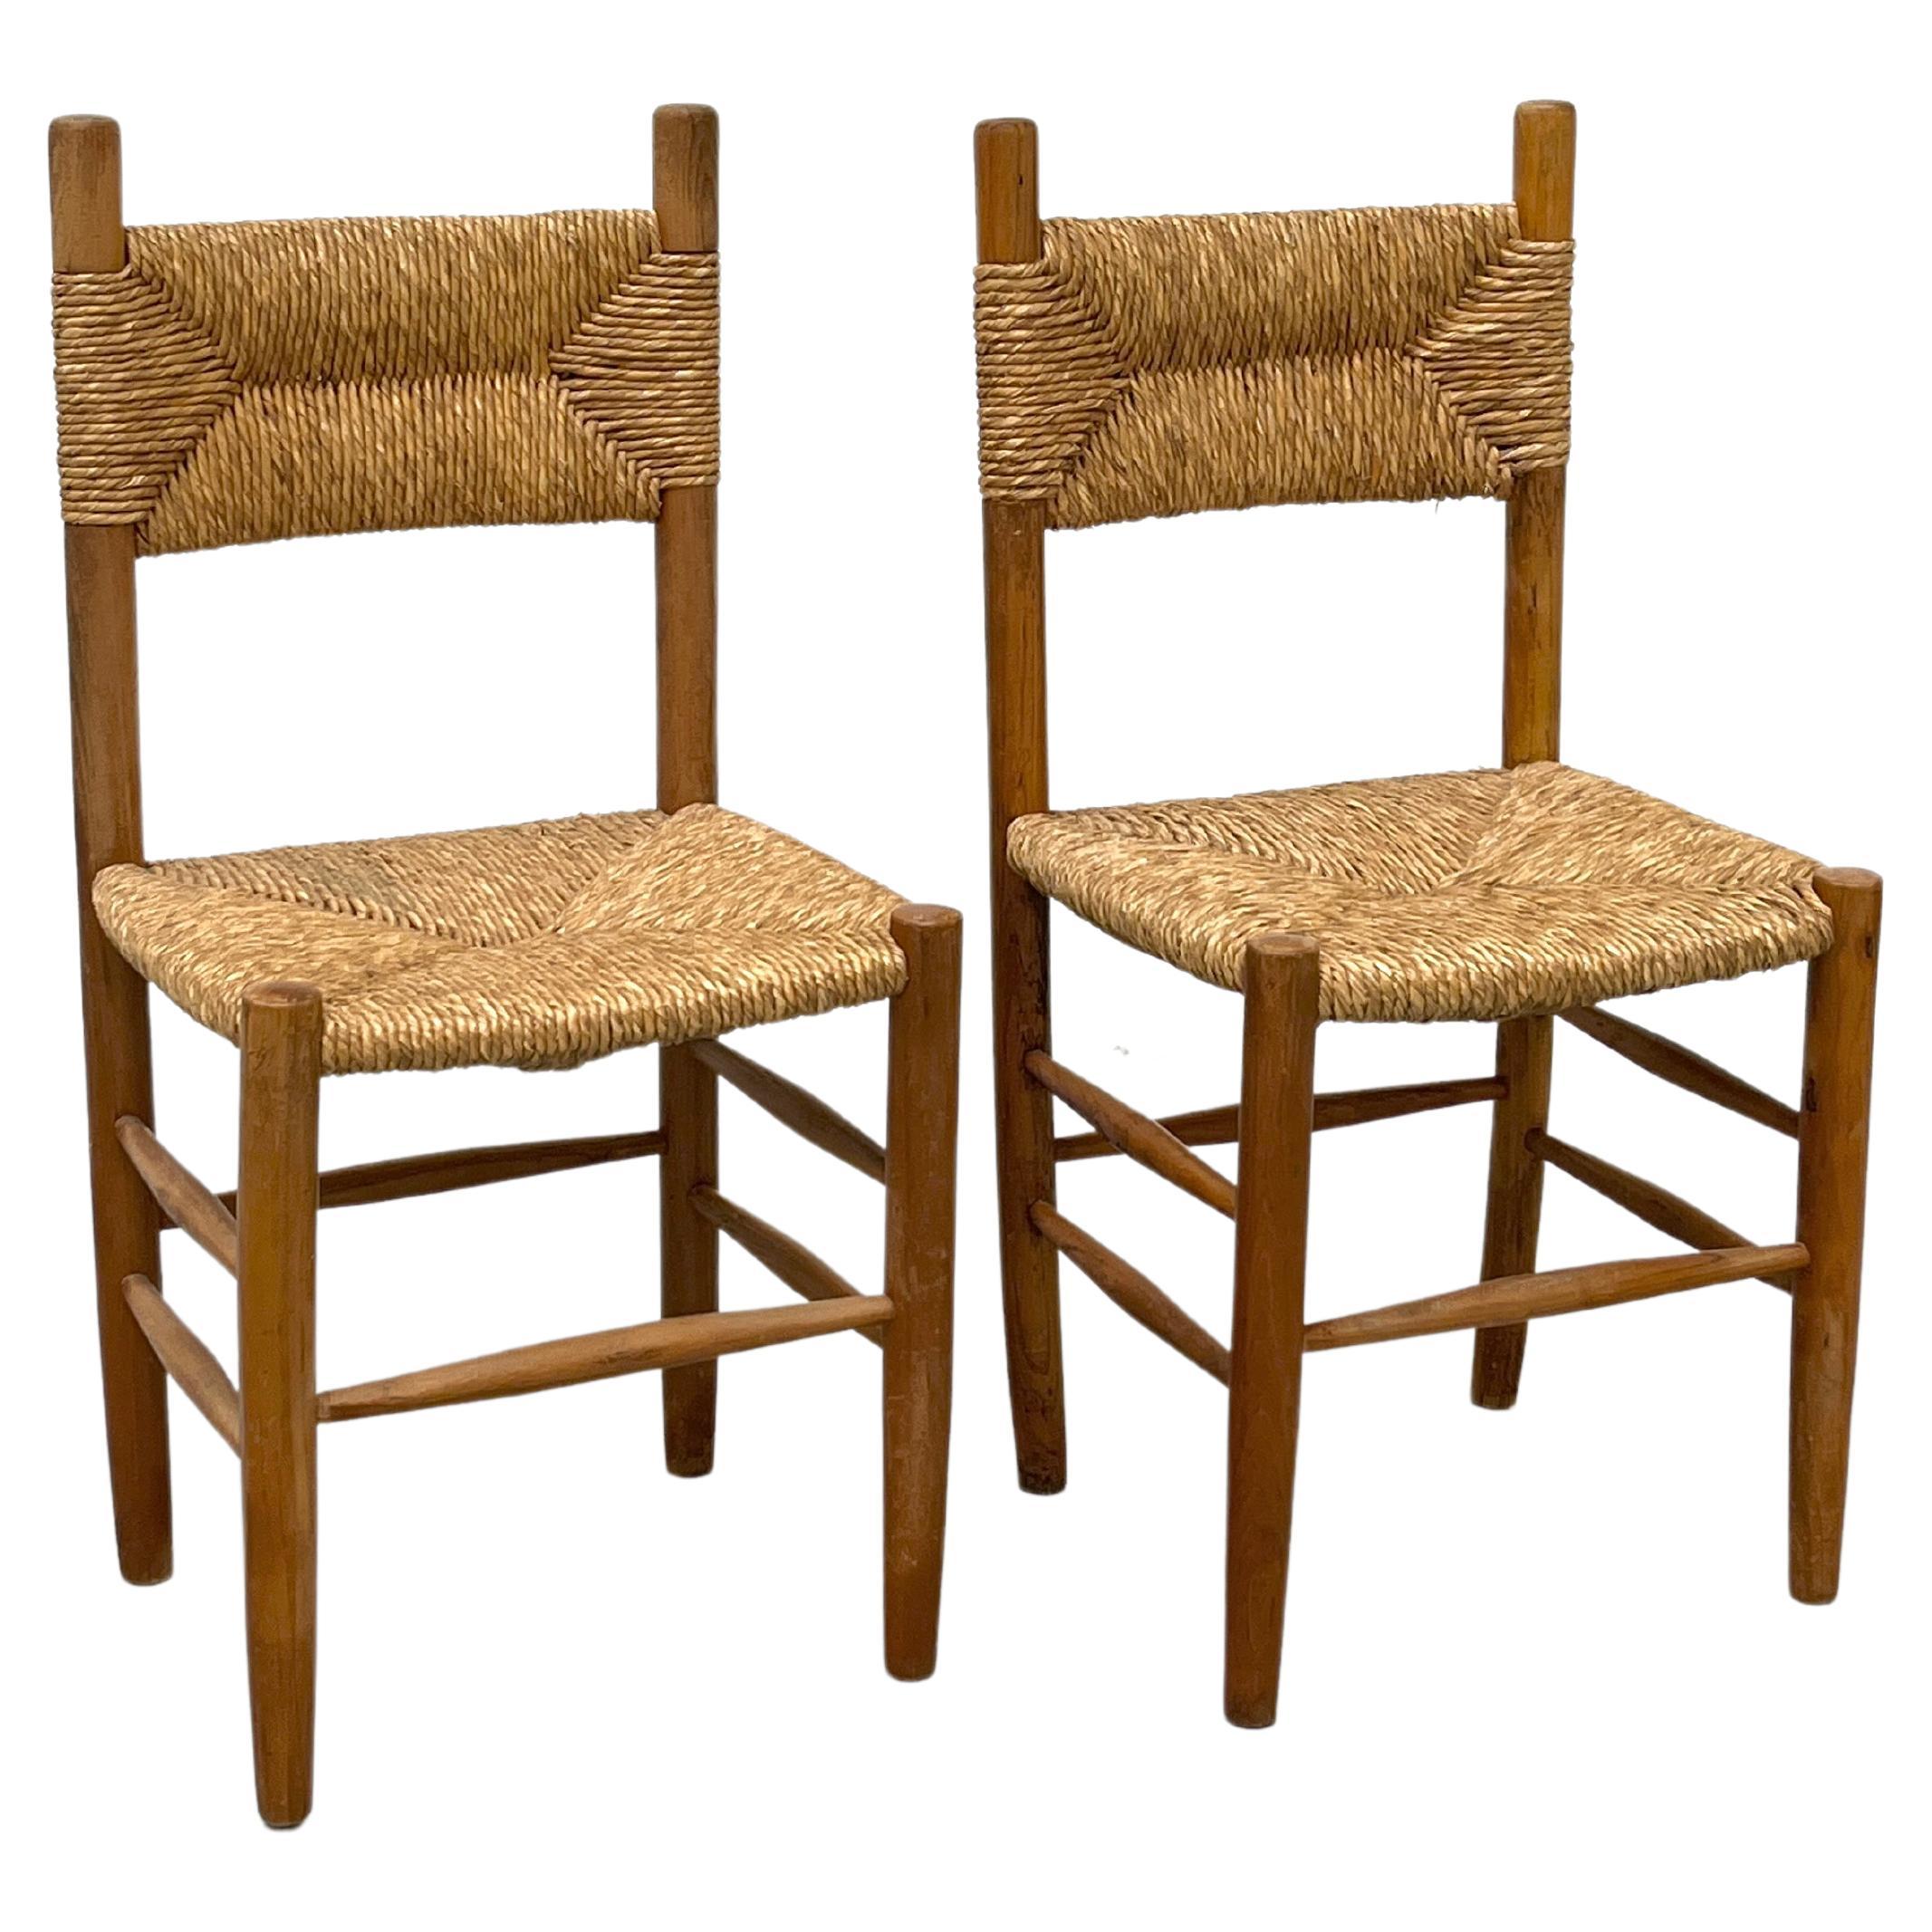 Pair of beechwood chairs with straw seat in the style of Charlotte Perriand